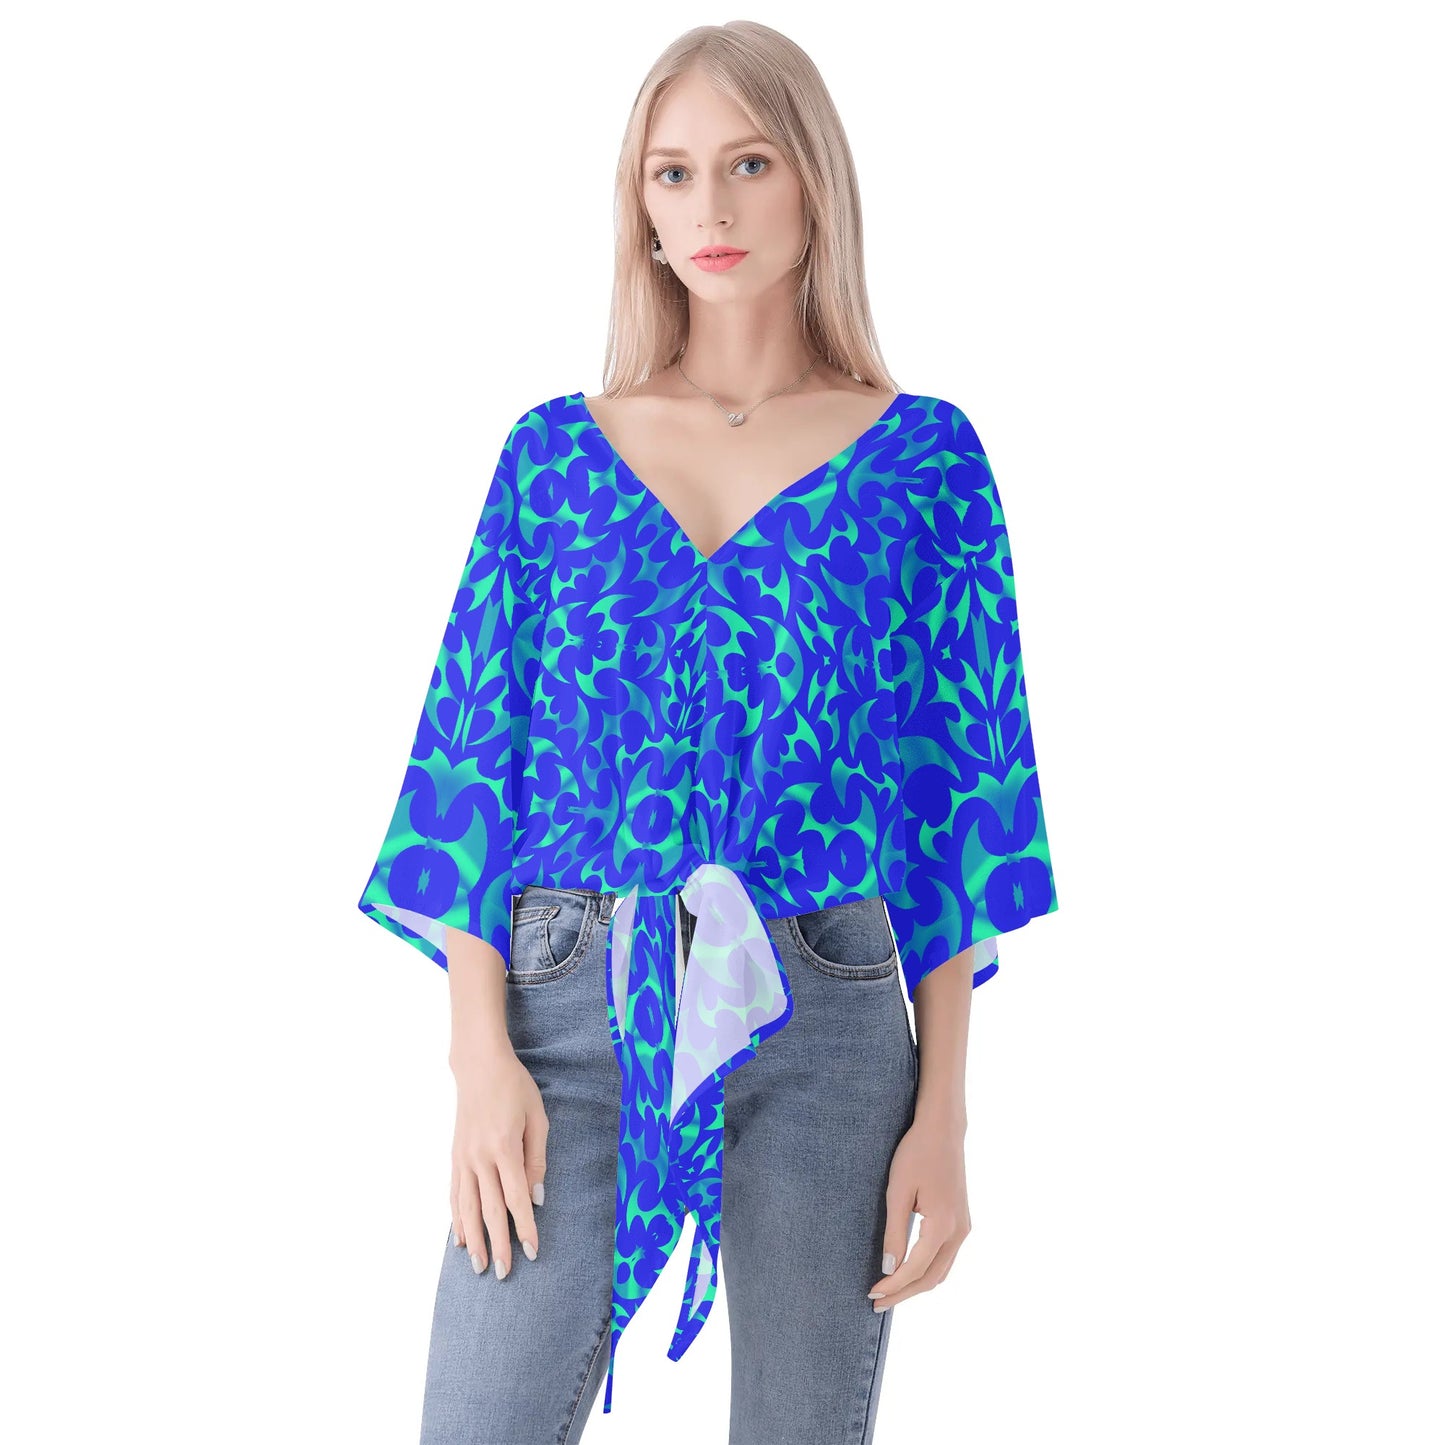 Call on Him- Women‘s’ V-neck Tie Front Knot Chiffon Blouse